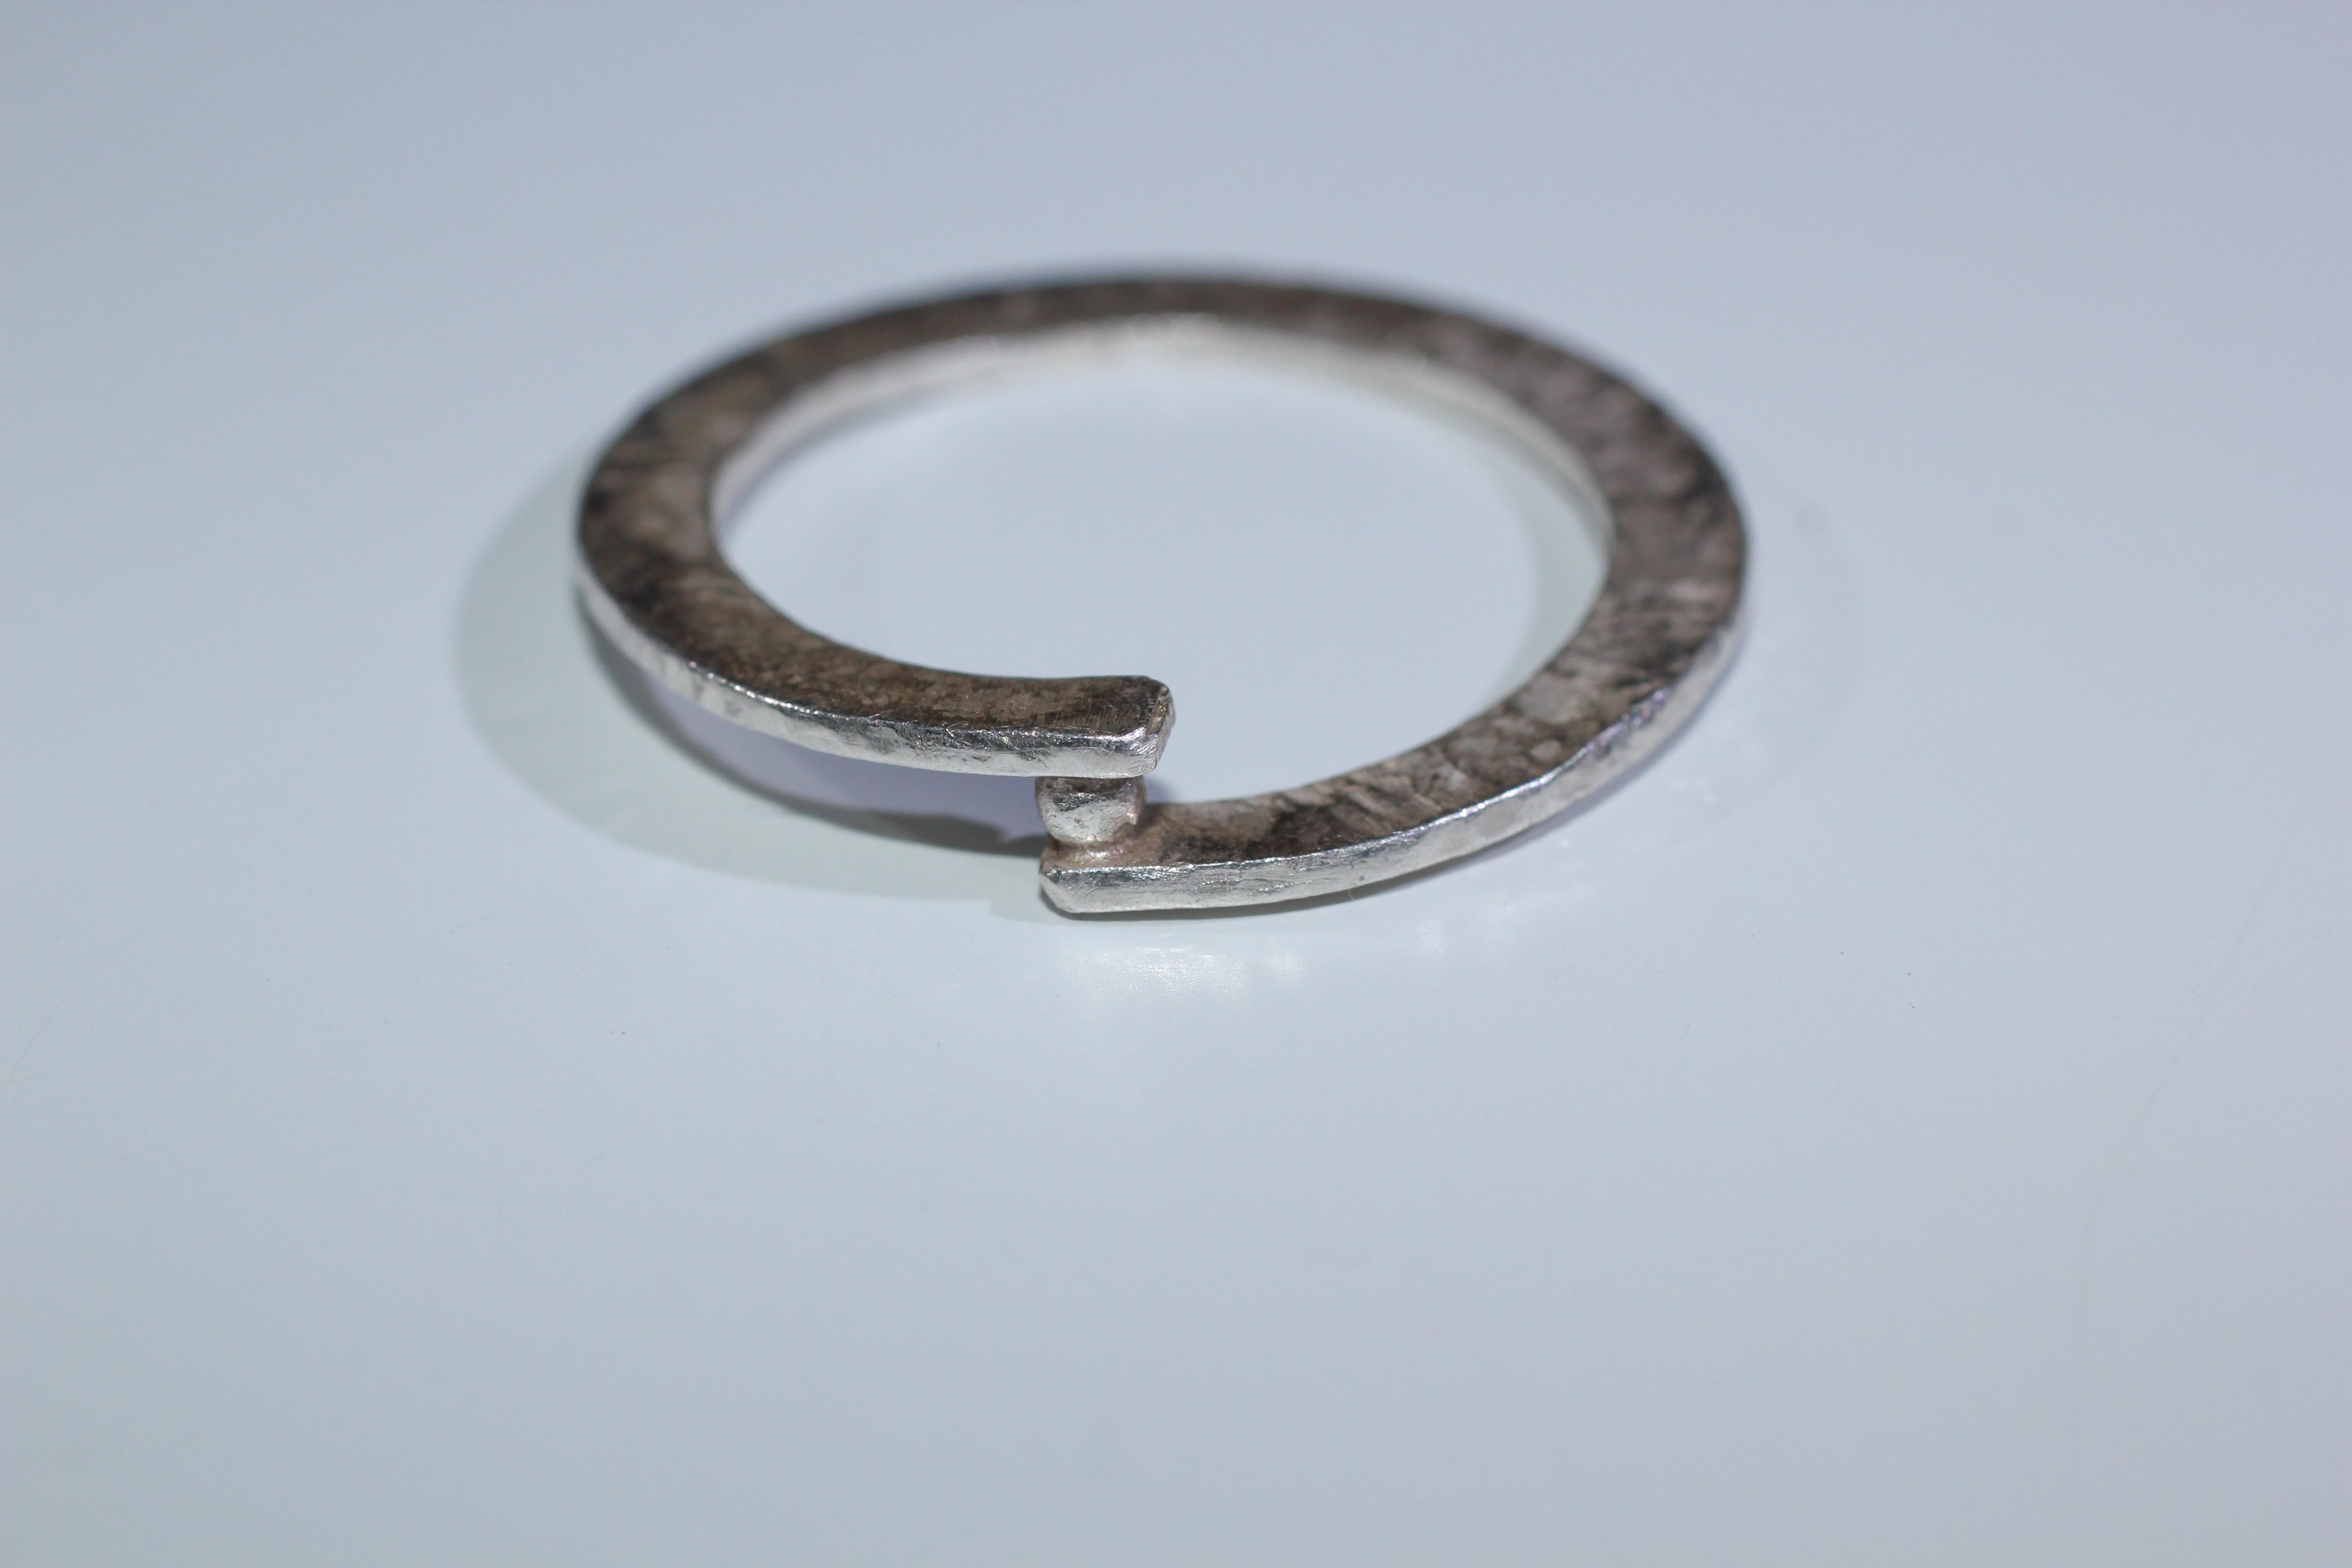 Simplicity With A Twist Holding One Granule, contemporary design.

This listing is for a fashion ring in sterling silver, measuring 1mm wide by 3mm thick.

Process: This striking ring is first hand forged in 21k gold, then cast in various metals and